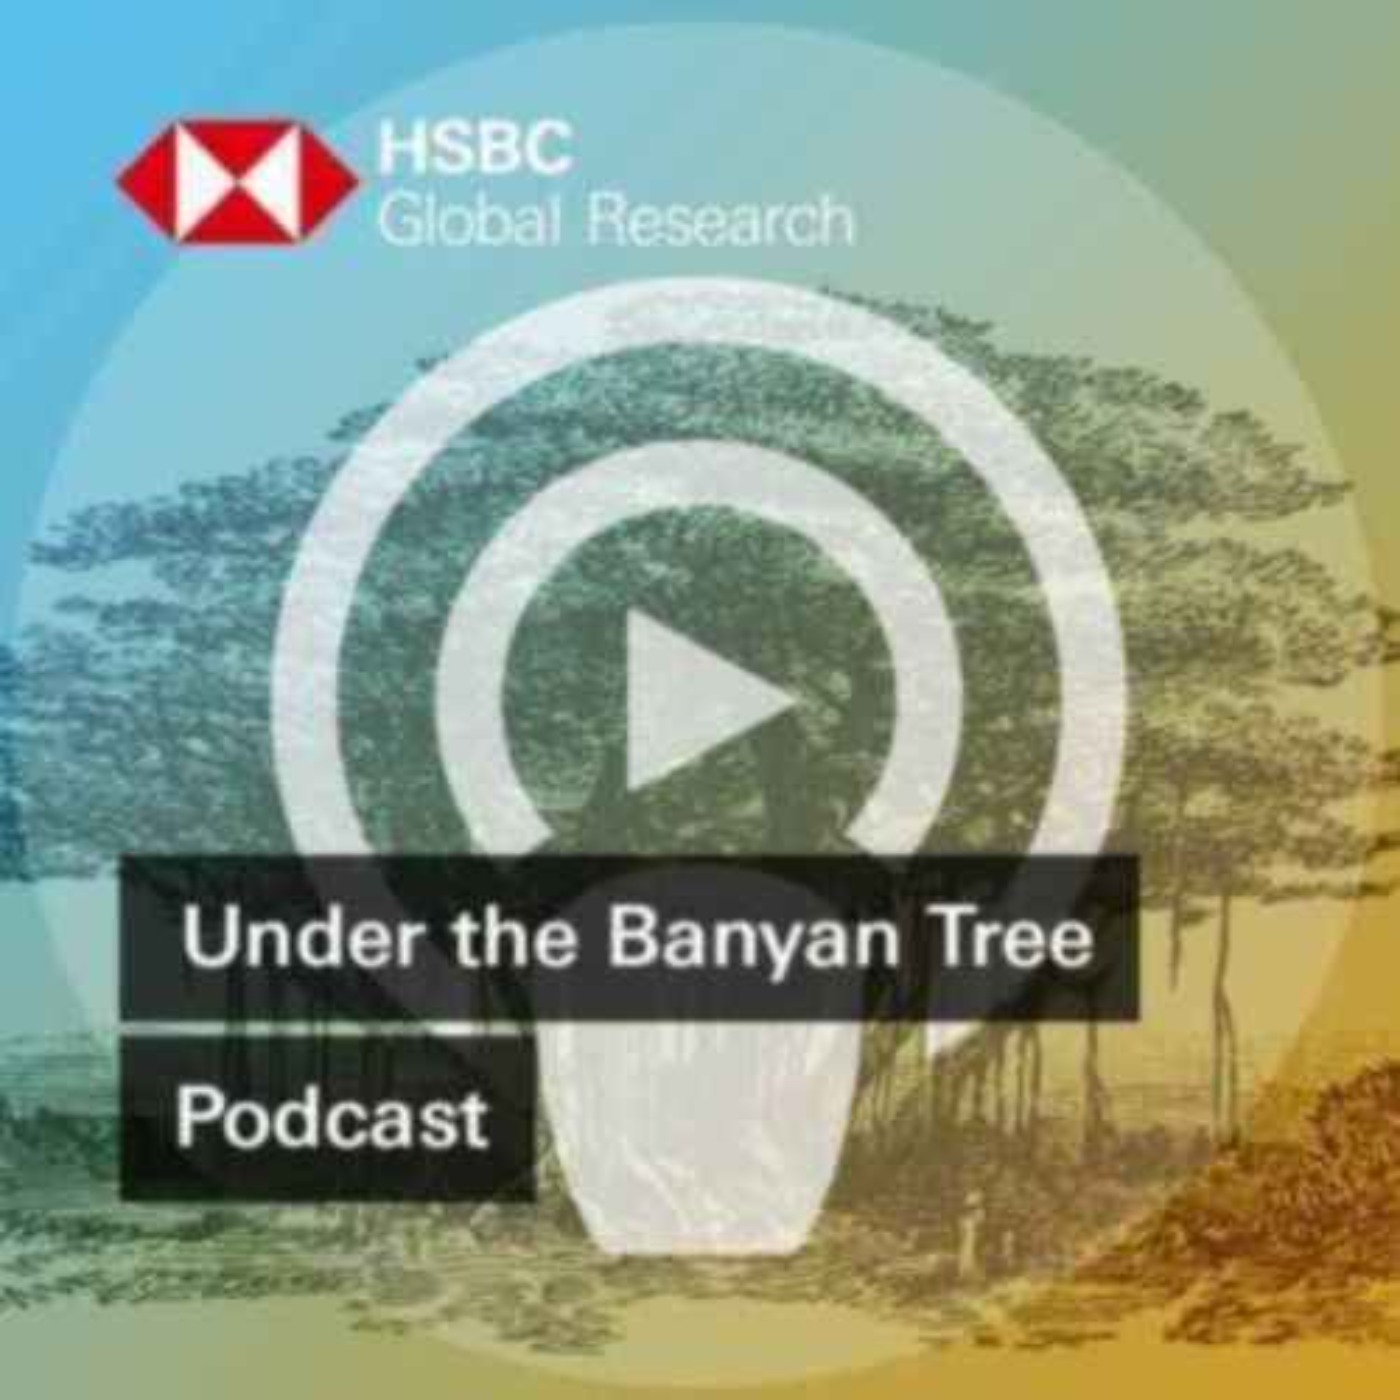 Under the Banyan Tree - Things you probably didn’t know about Asian markets